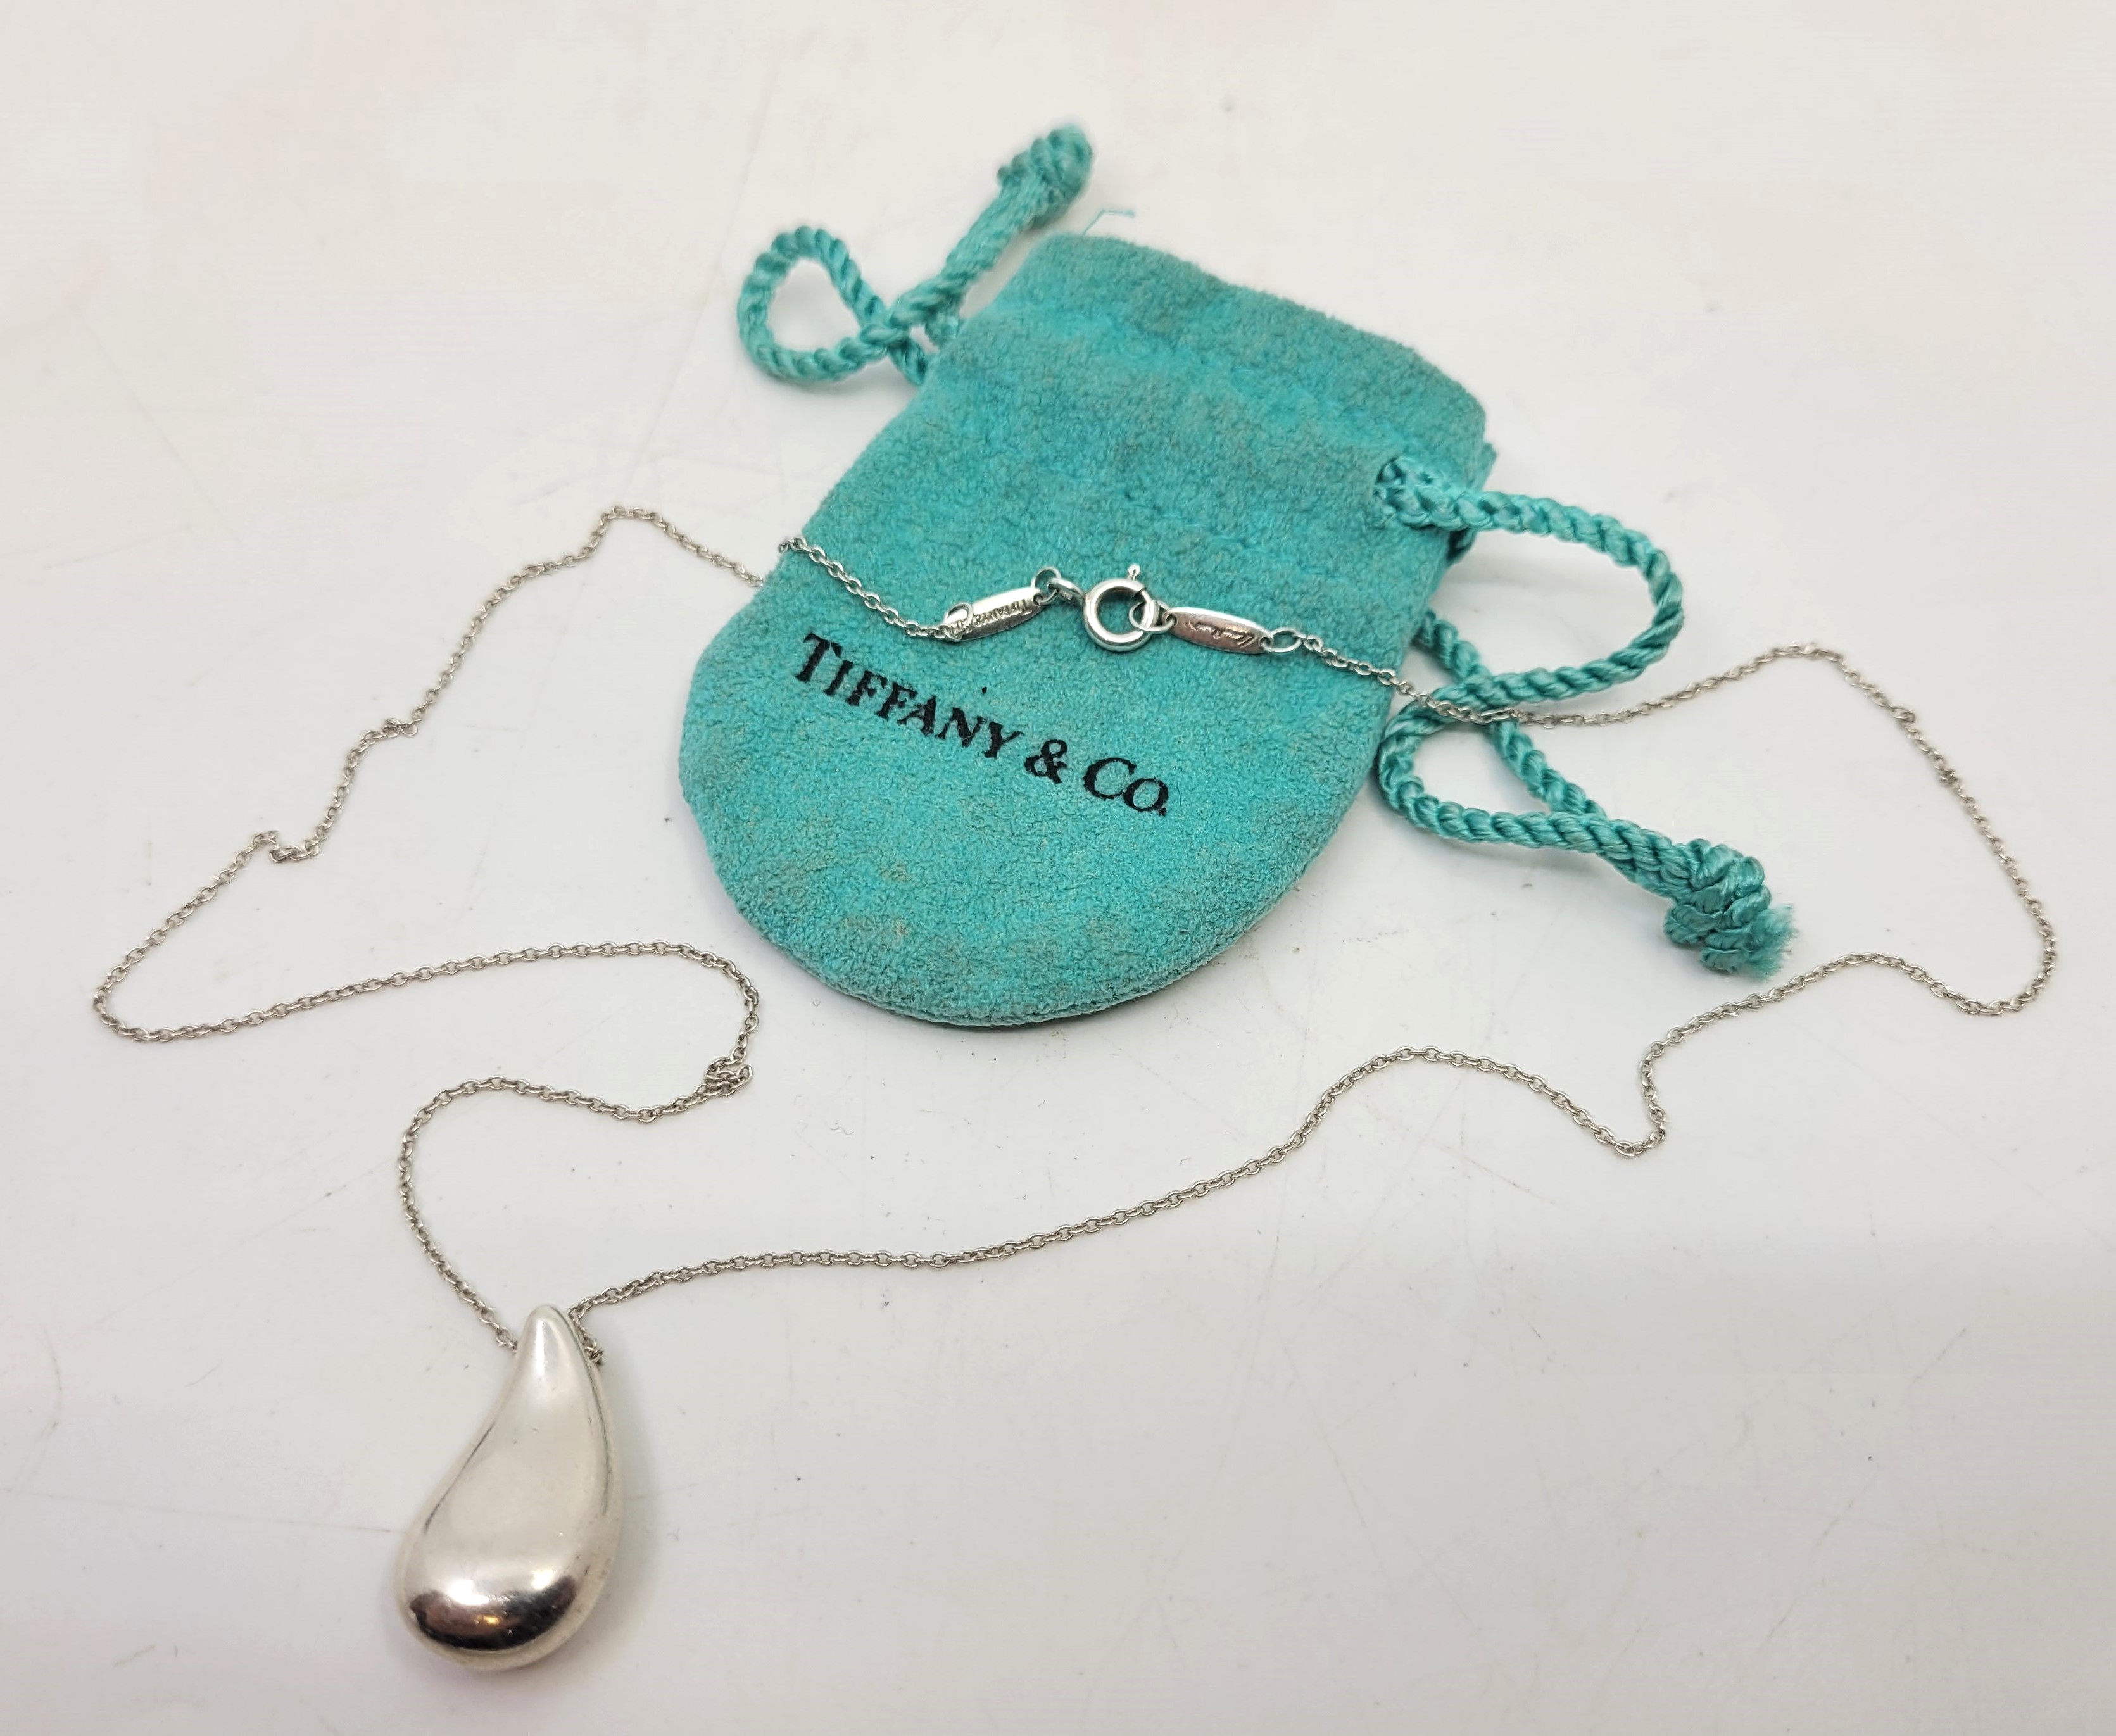 An Elsa Peretti for Tiffany & Co. sterling silver teardrop pendant necklace, height 21mm, to 46.